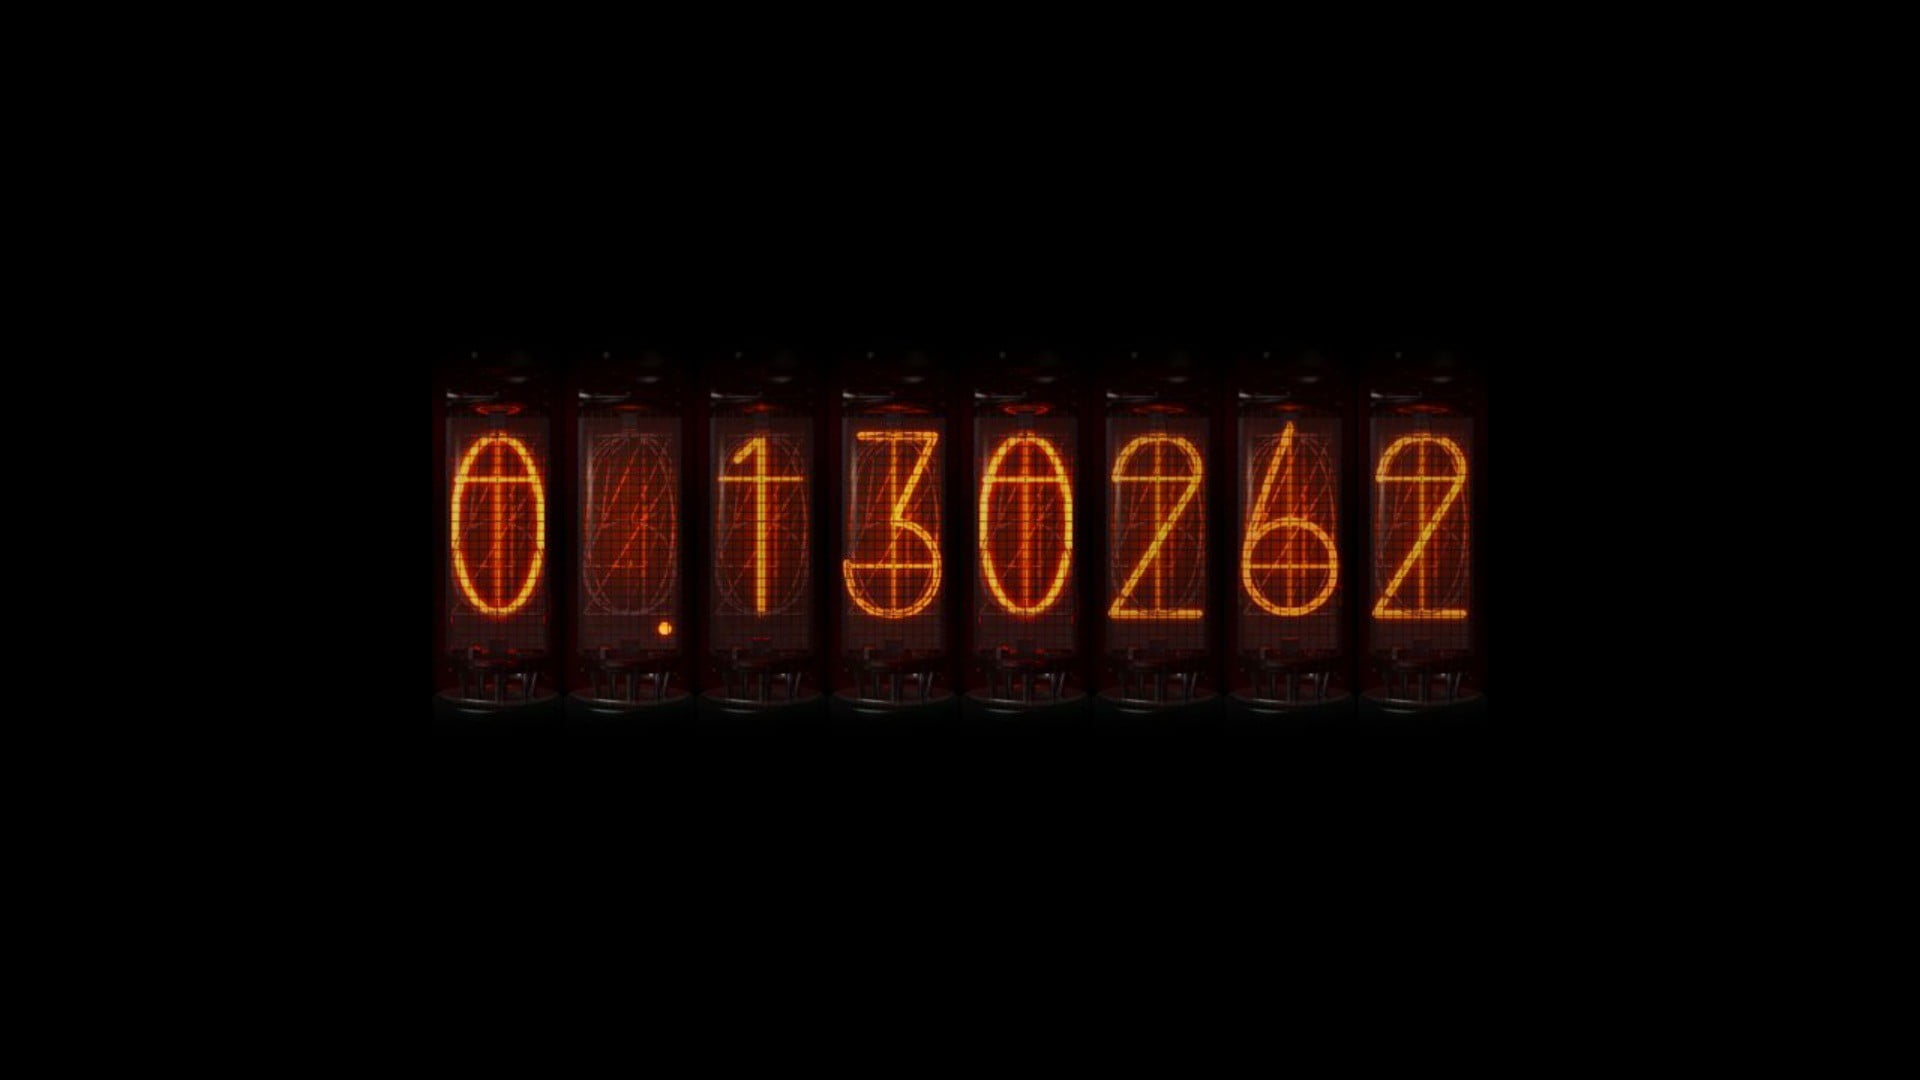 00130262 number, Steins;Gate, anime, time travel, Divergence Meter